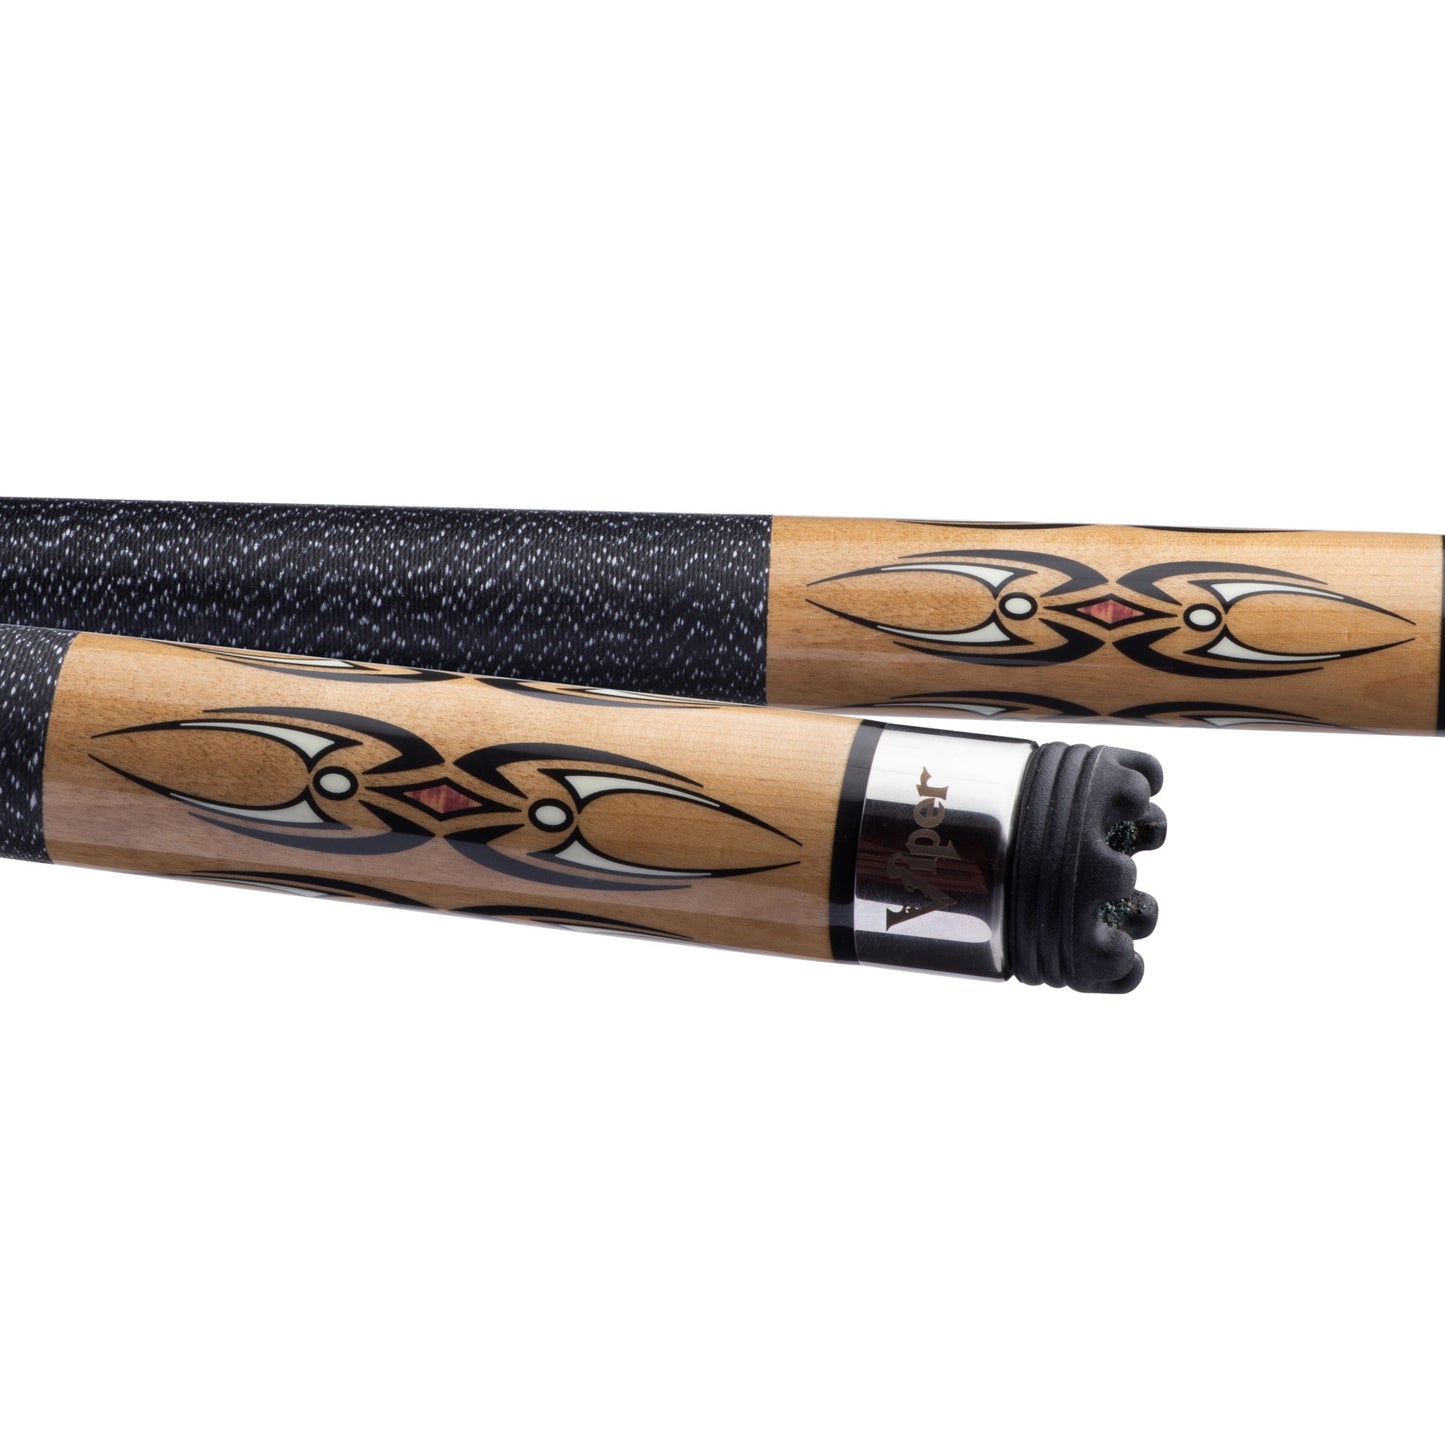 Viper Sinister Black and White Wrap 18oz Pool Cue